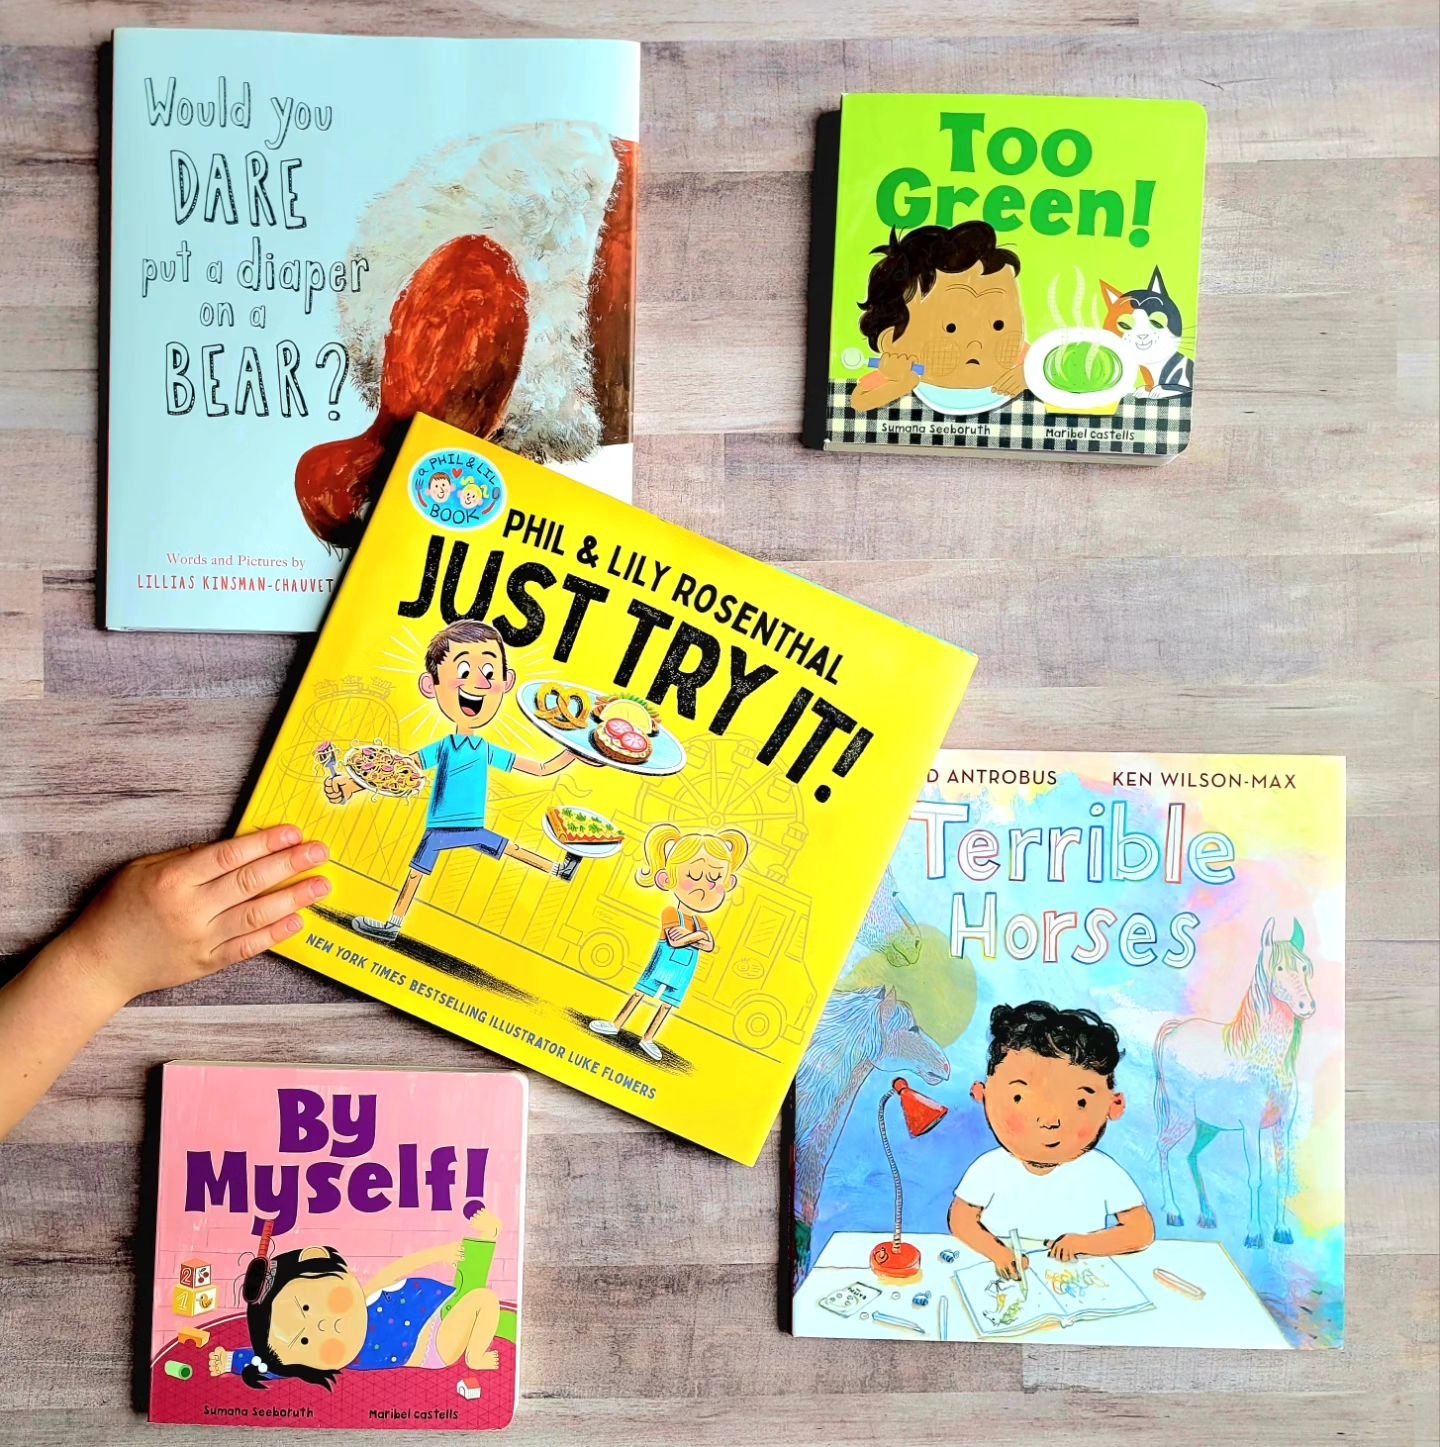 💗Growing up can be tricky, but luckily, there are books to help! Today's picture book and board book mash-up is perfect for kids who are picky eaters, trying to be independent, or who get into fights with siblings. ❤️Happy reading!

👕By Myself!&nbs